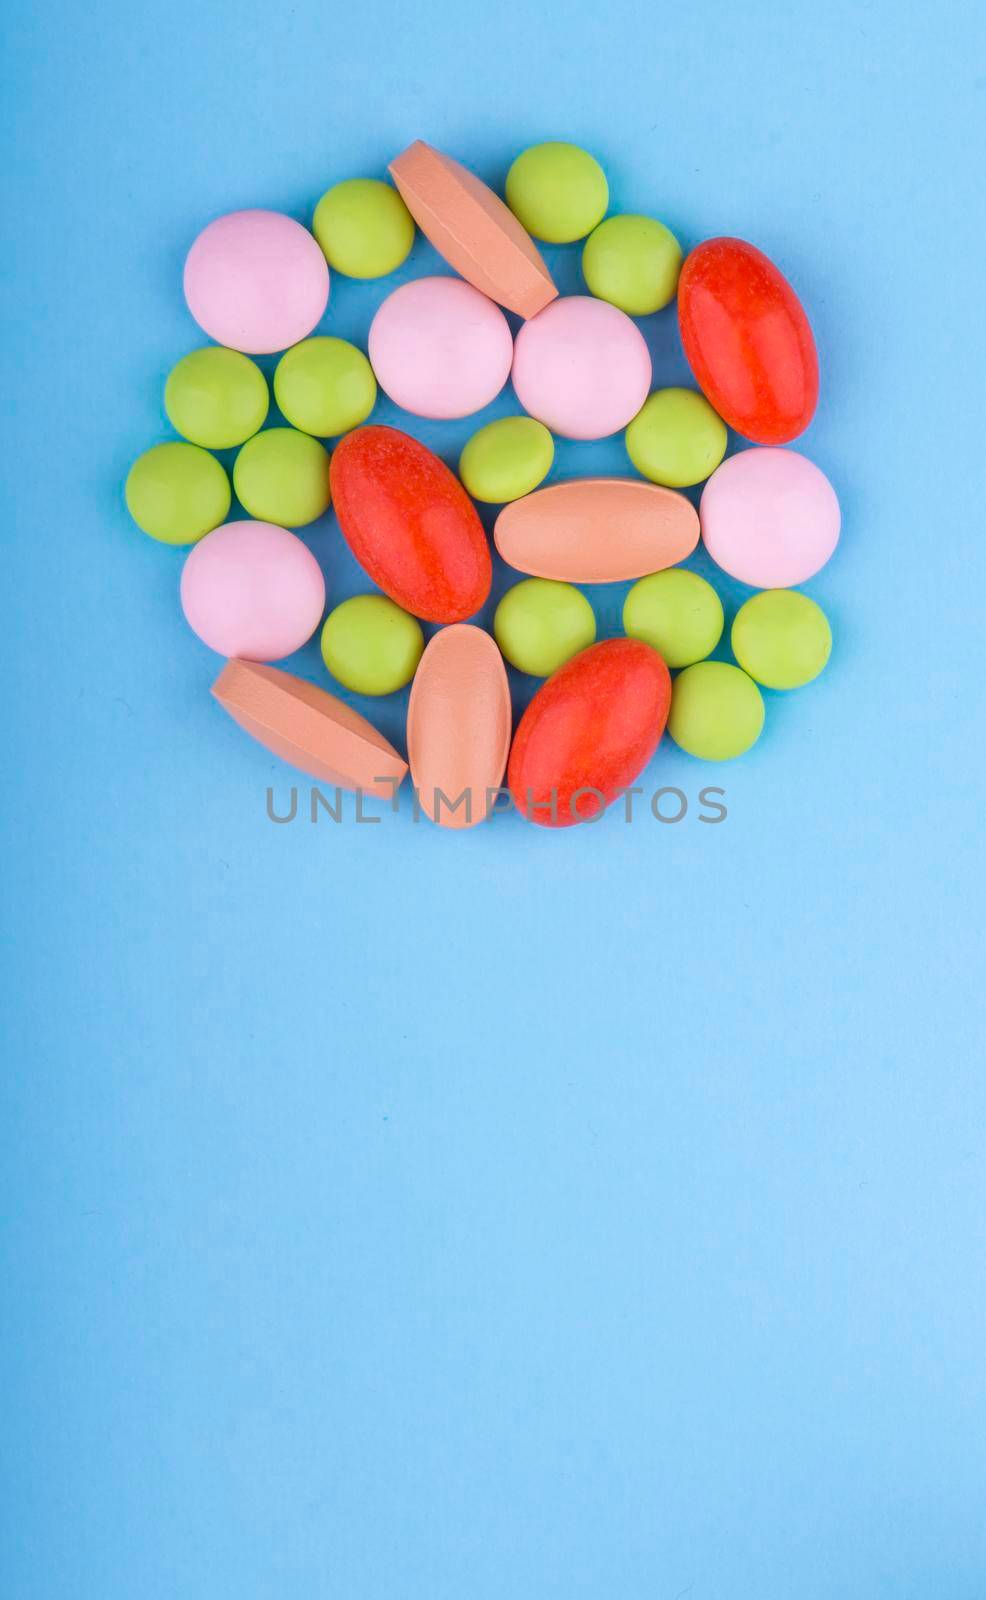 Colored pills, tablets and capsules on a blue background.